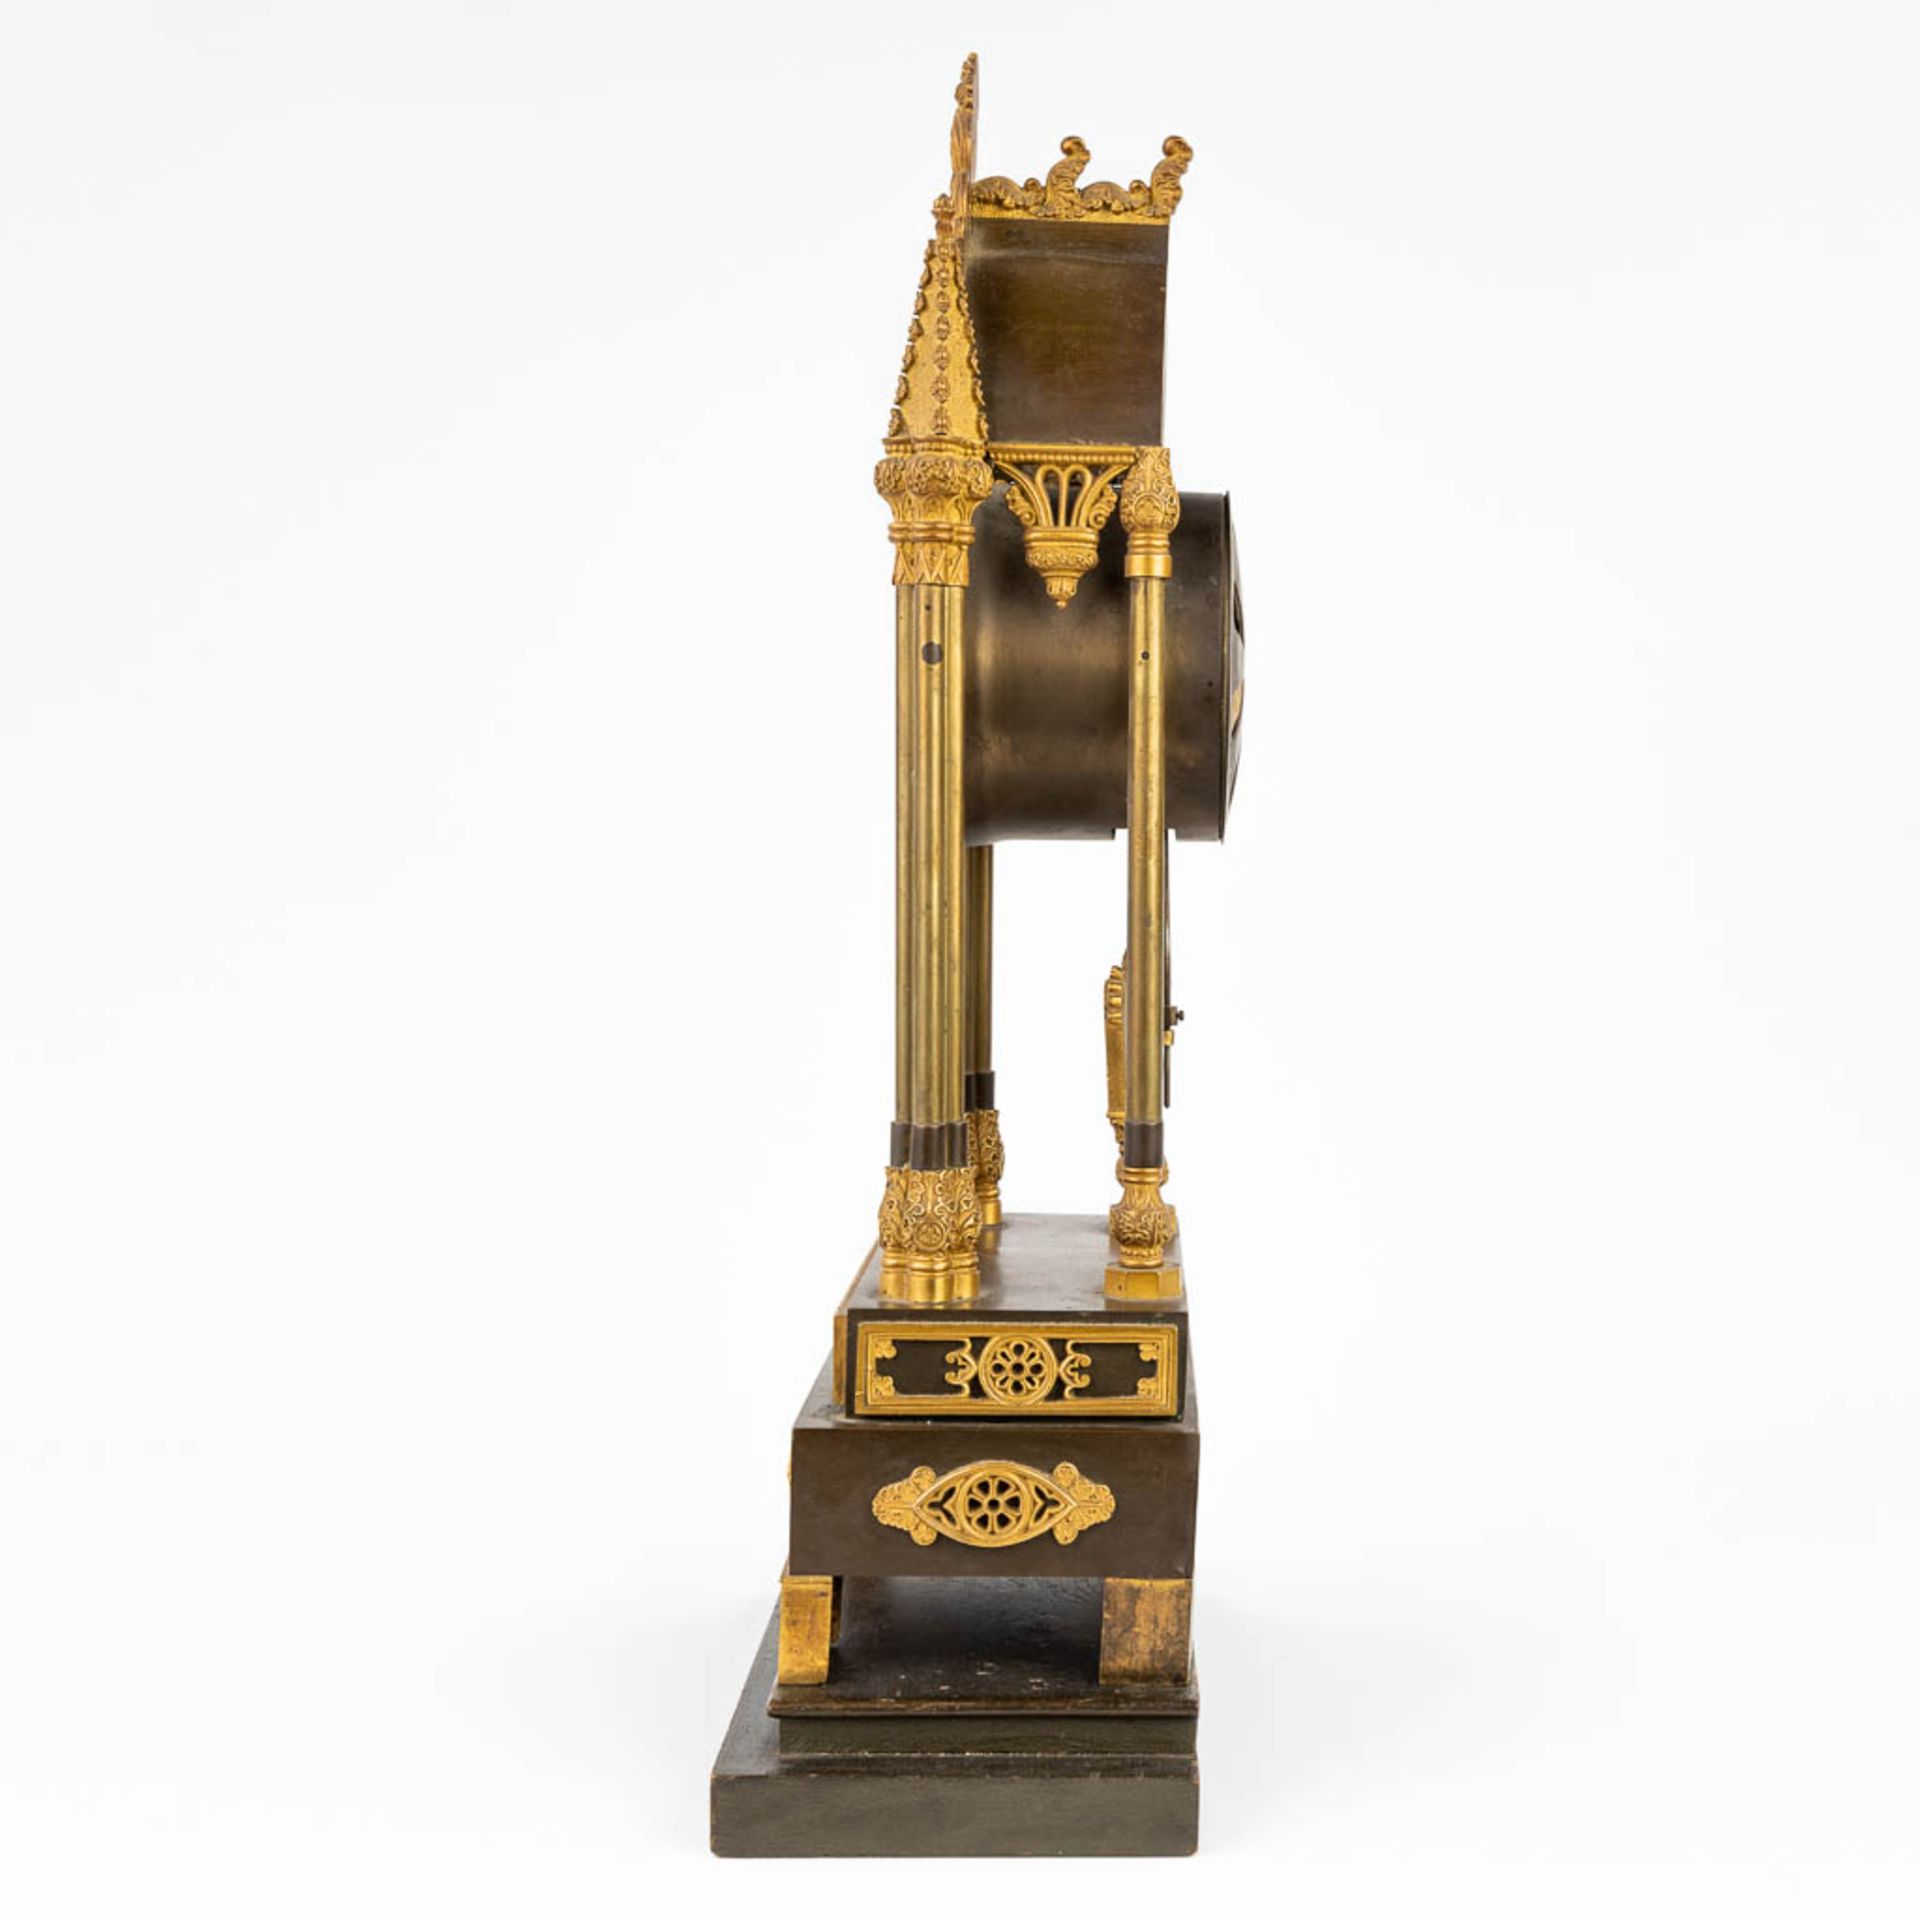 A table column clock made of gilt bronze in a gothic revival style. (11 x 19,5 x 43cm) - Image 15 of 15